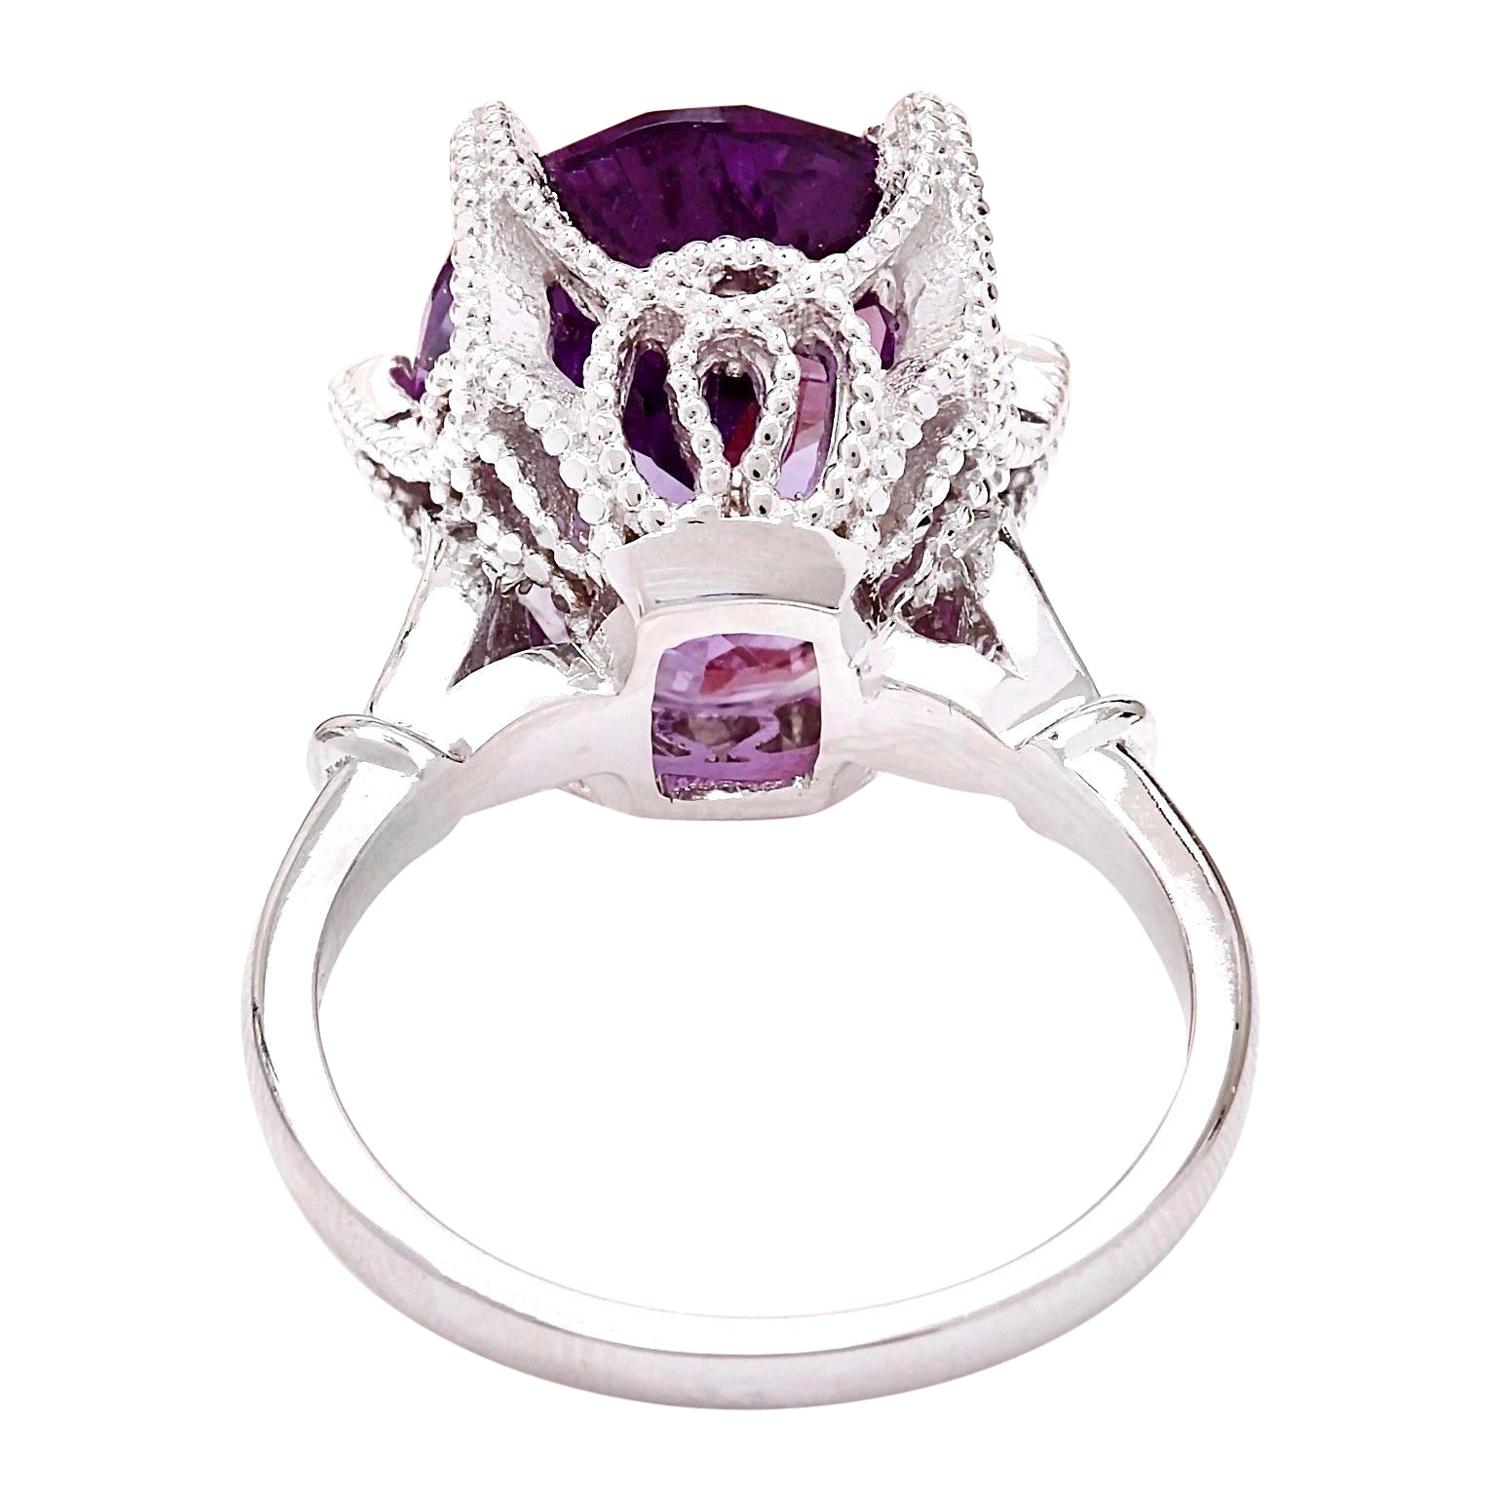 Oval Cut 8.64 Carat Natural Amethyst 14 Karat Solid White Gold Diamond Ring For Sale